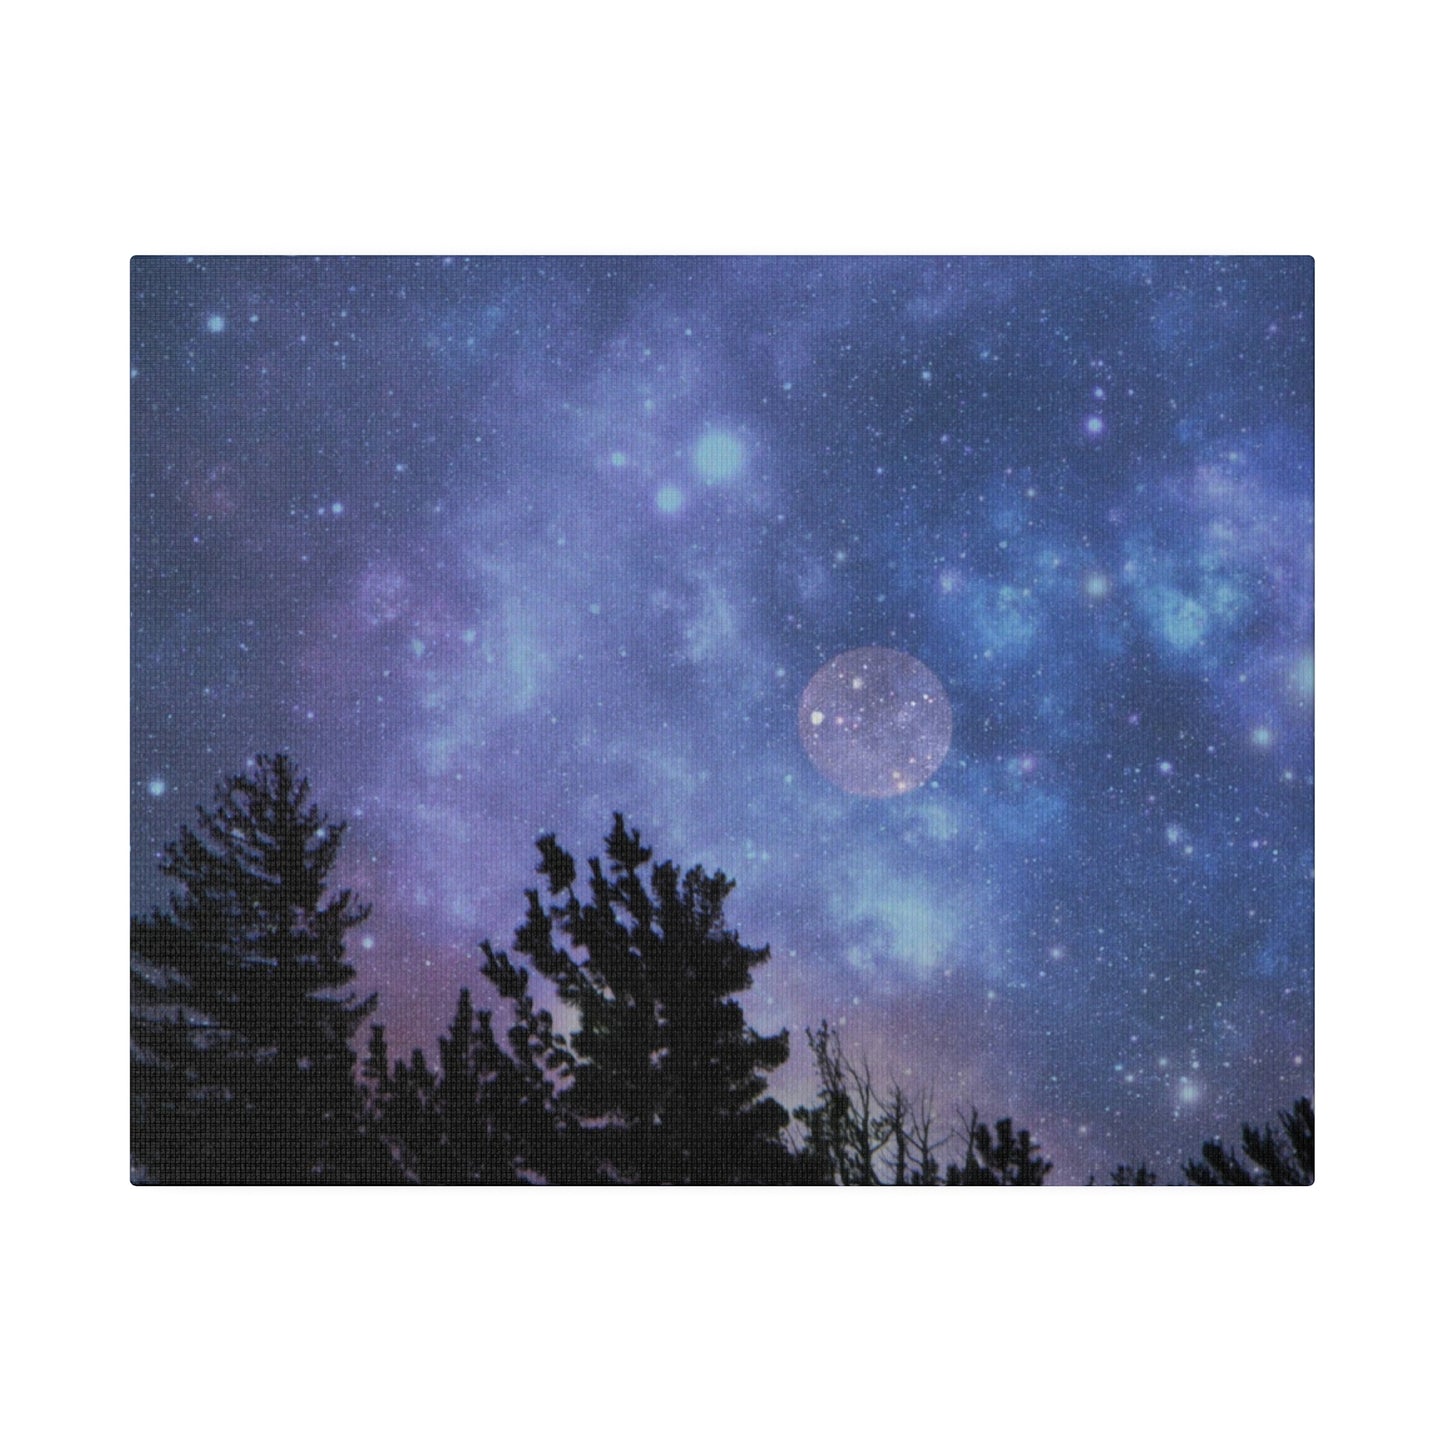 A night sky filled with stars and nebulae above silhouetted trees, depicted on a Printify Blue-Moon Matte Canvas.